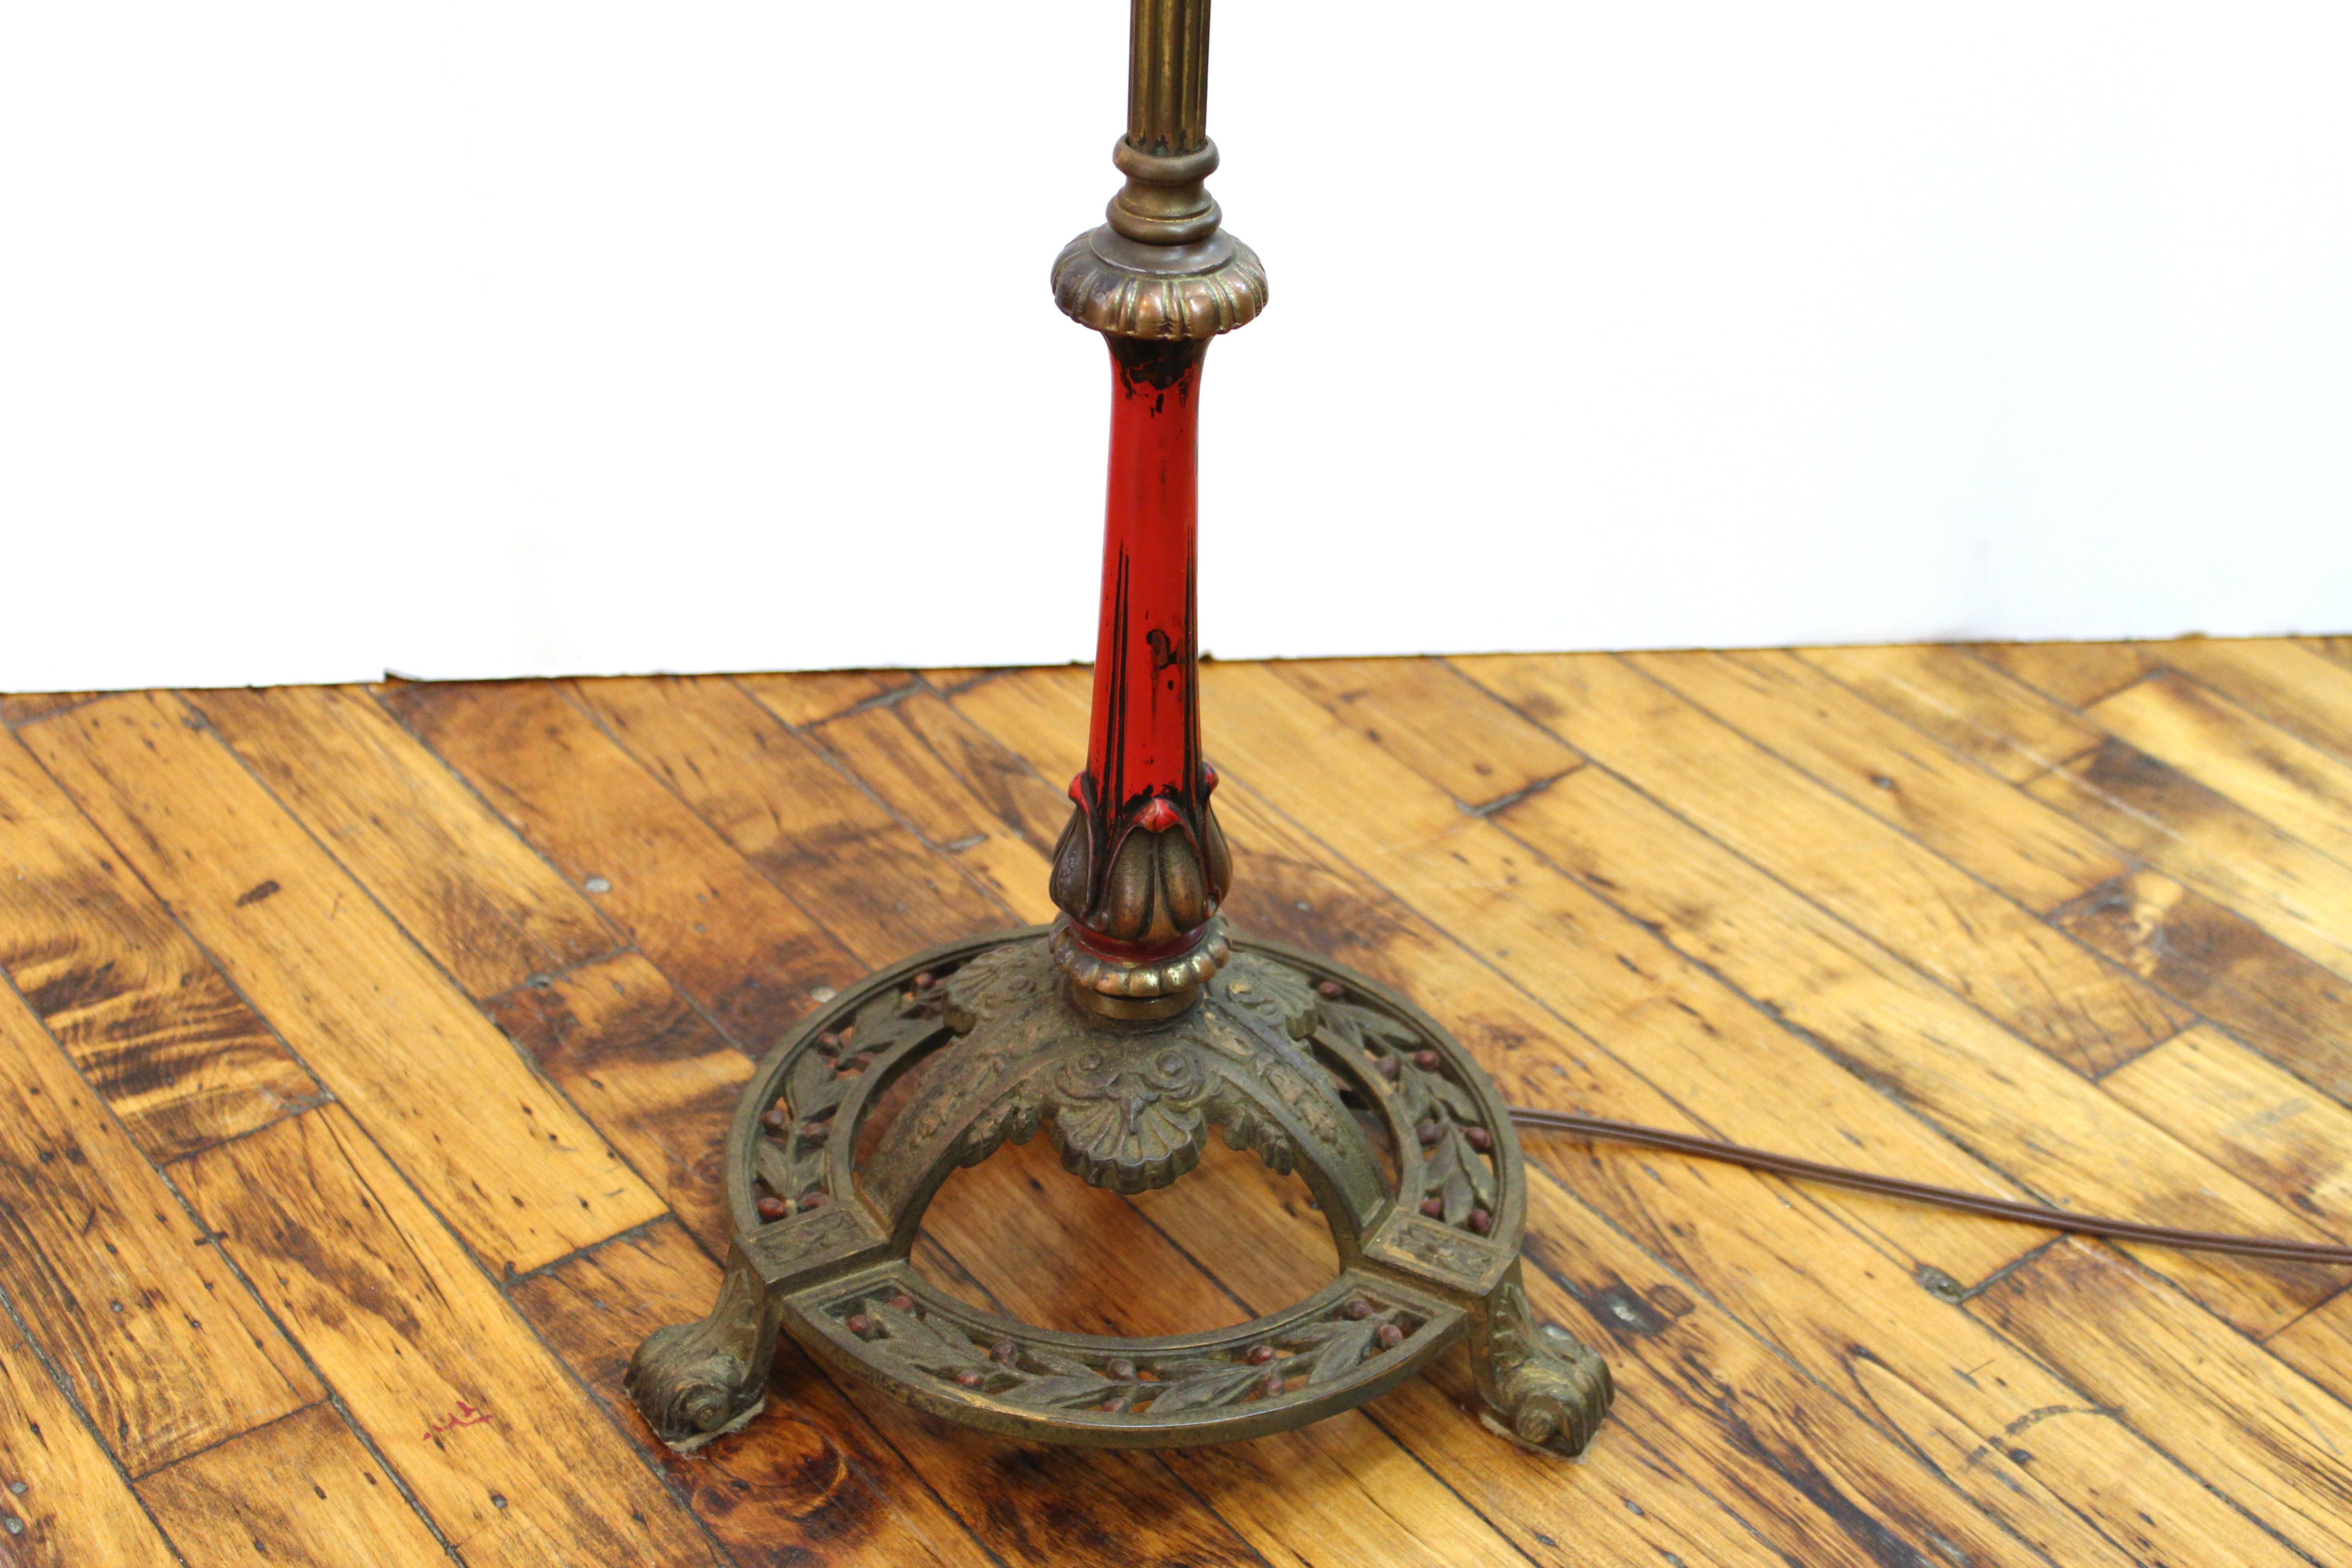 Victorian floor lamp in the style of Caldwell, with brass fluted shaft and intricate leaf design on the round base, partially painted on the base stem. Made in the United States in the 1890s, in great antique condition.